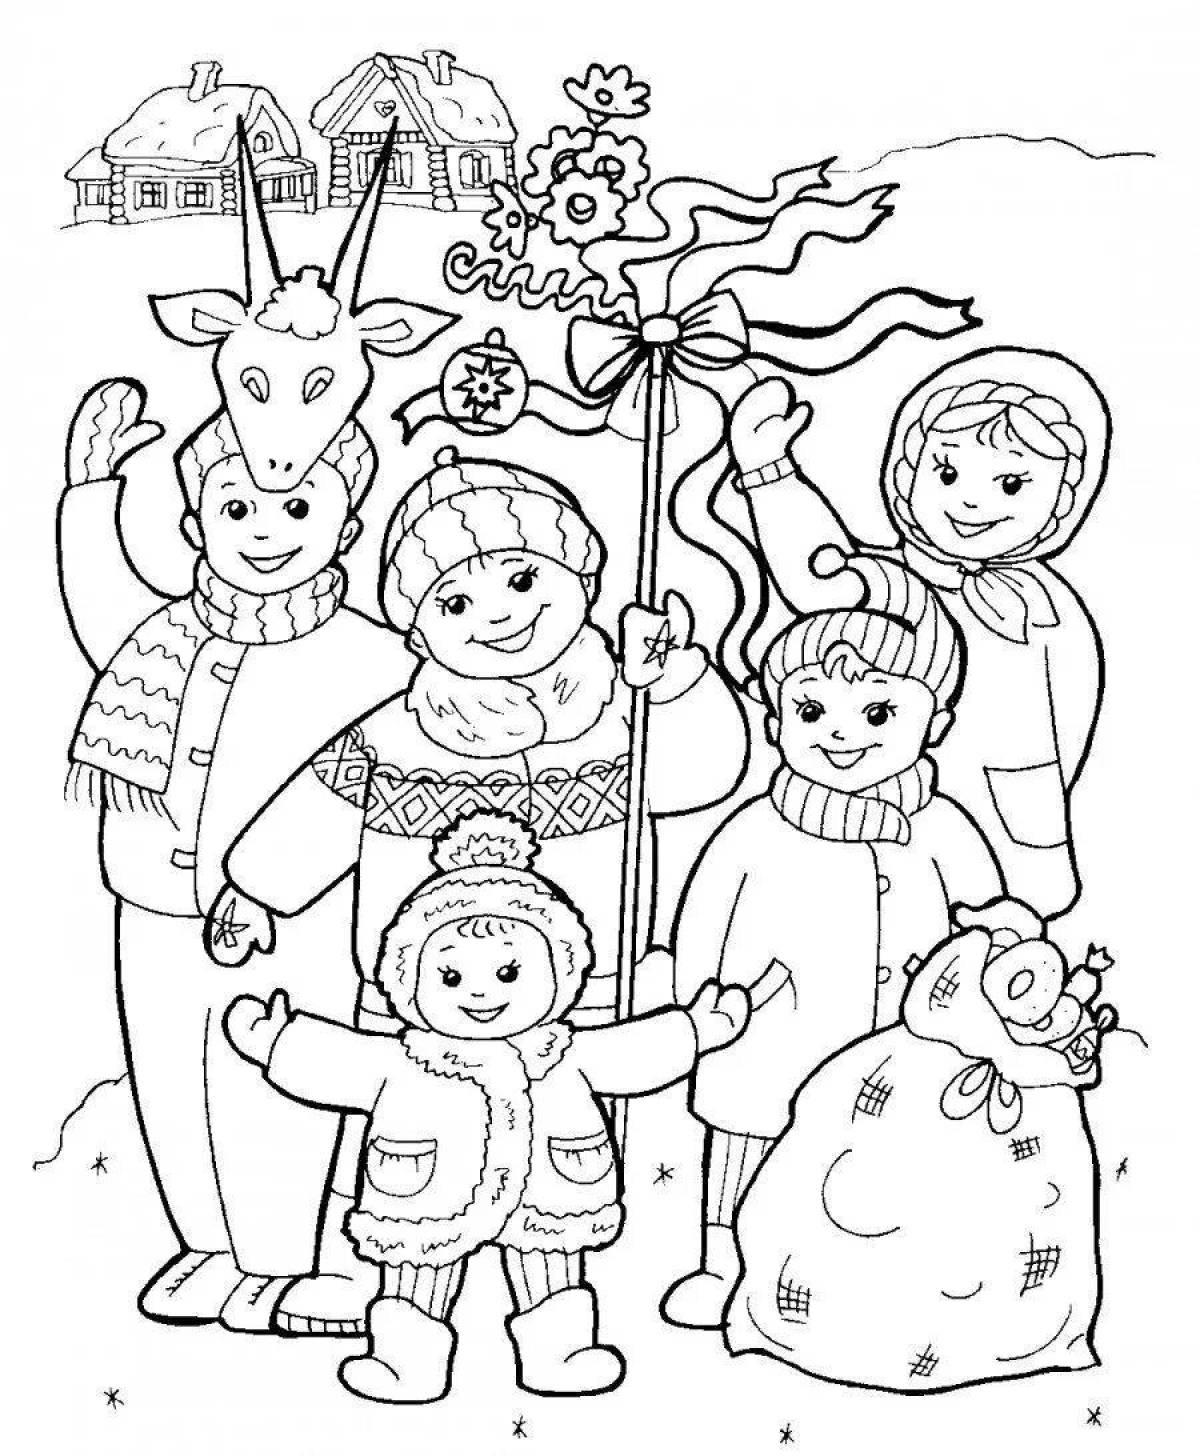 Festive Christmas coloring page